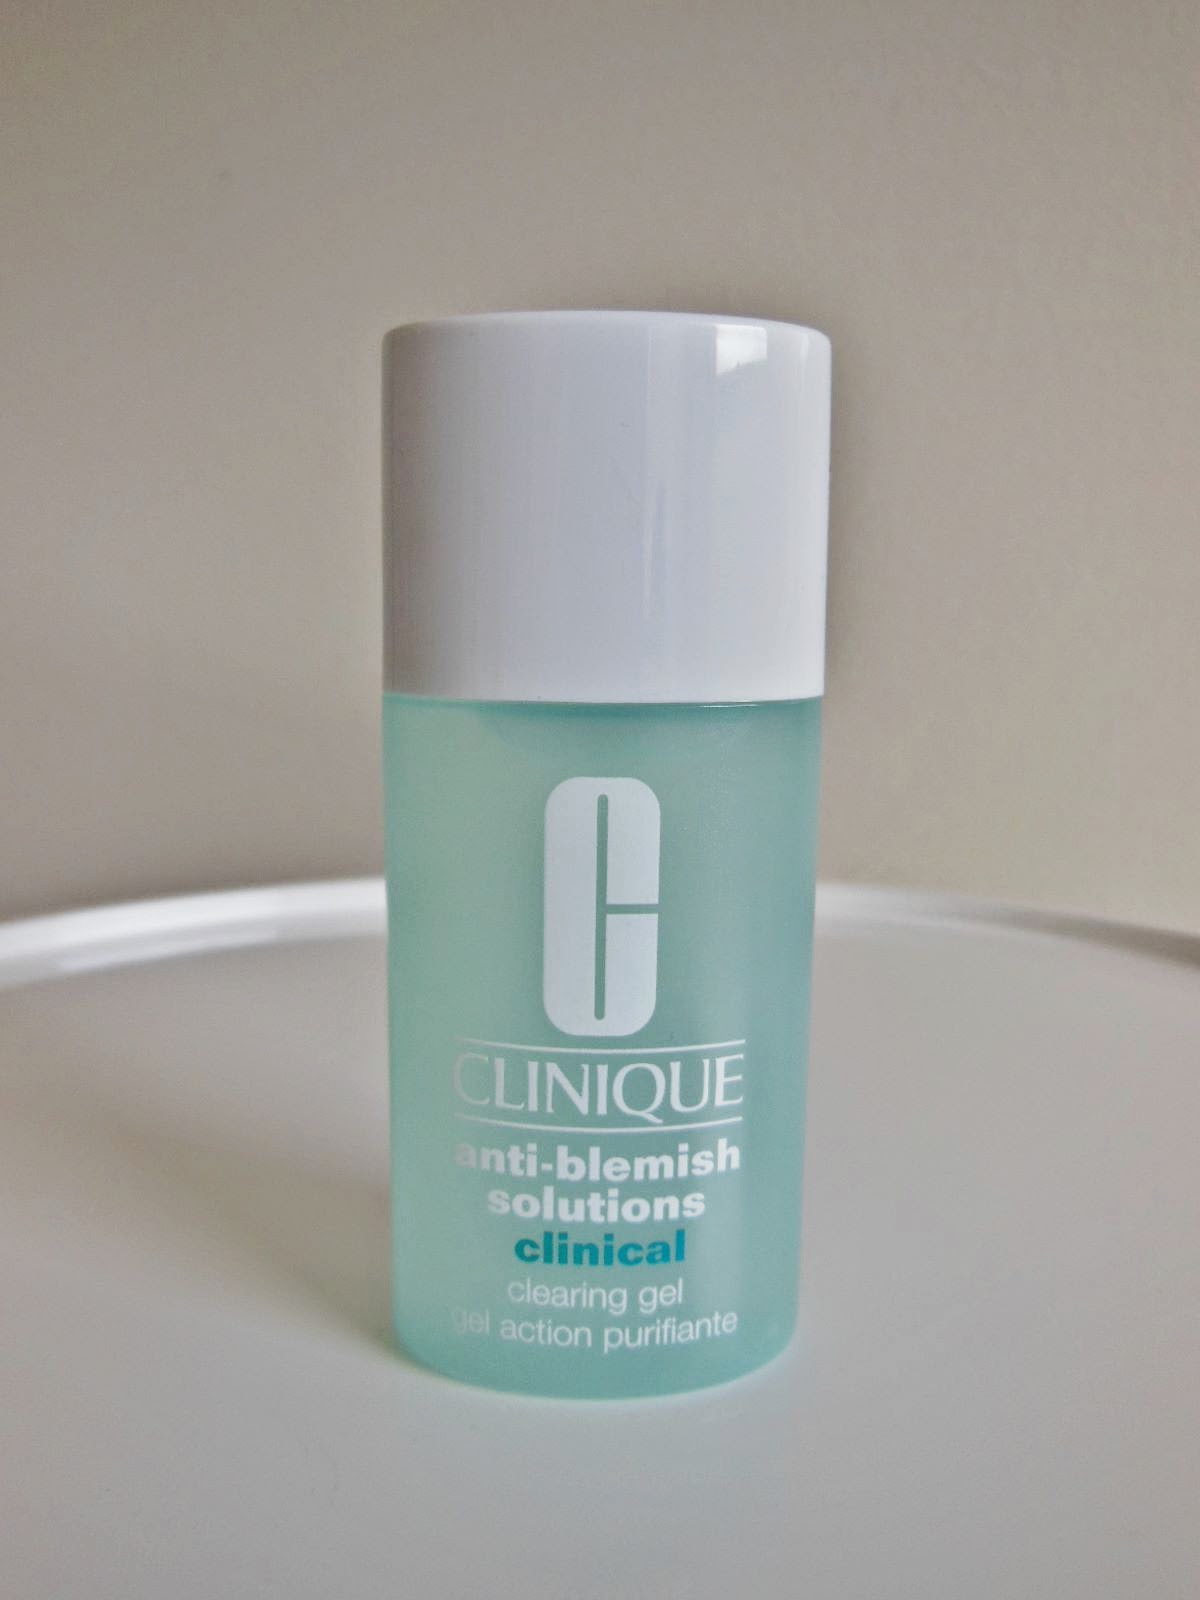 Insecten tellen meditatie Slechte factor PRODUCT REVIEW: CLINIQUE ANTI-BLEMISH SOLUTION CLINICAL CLEARING GEL | The  Beauty & Lifestyle Hunter